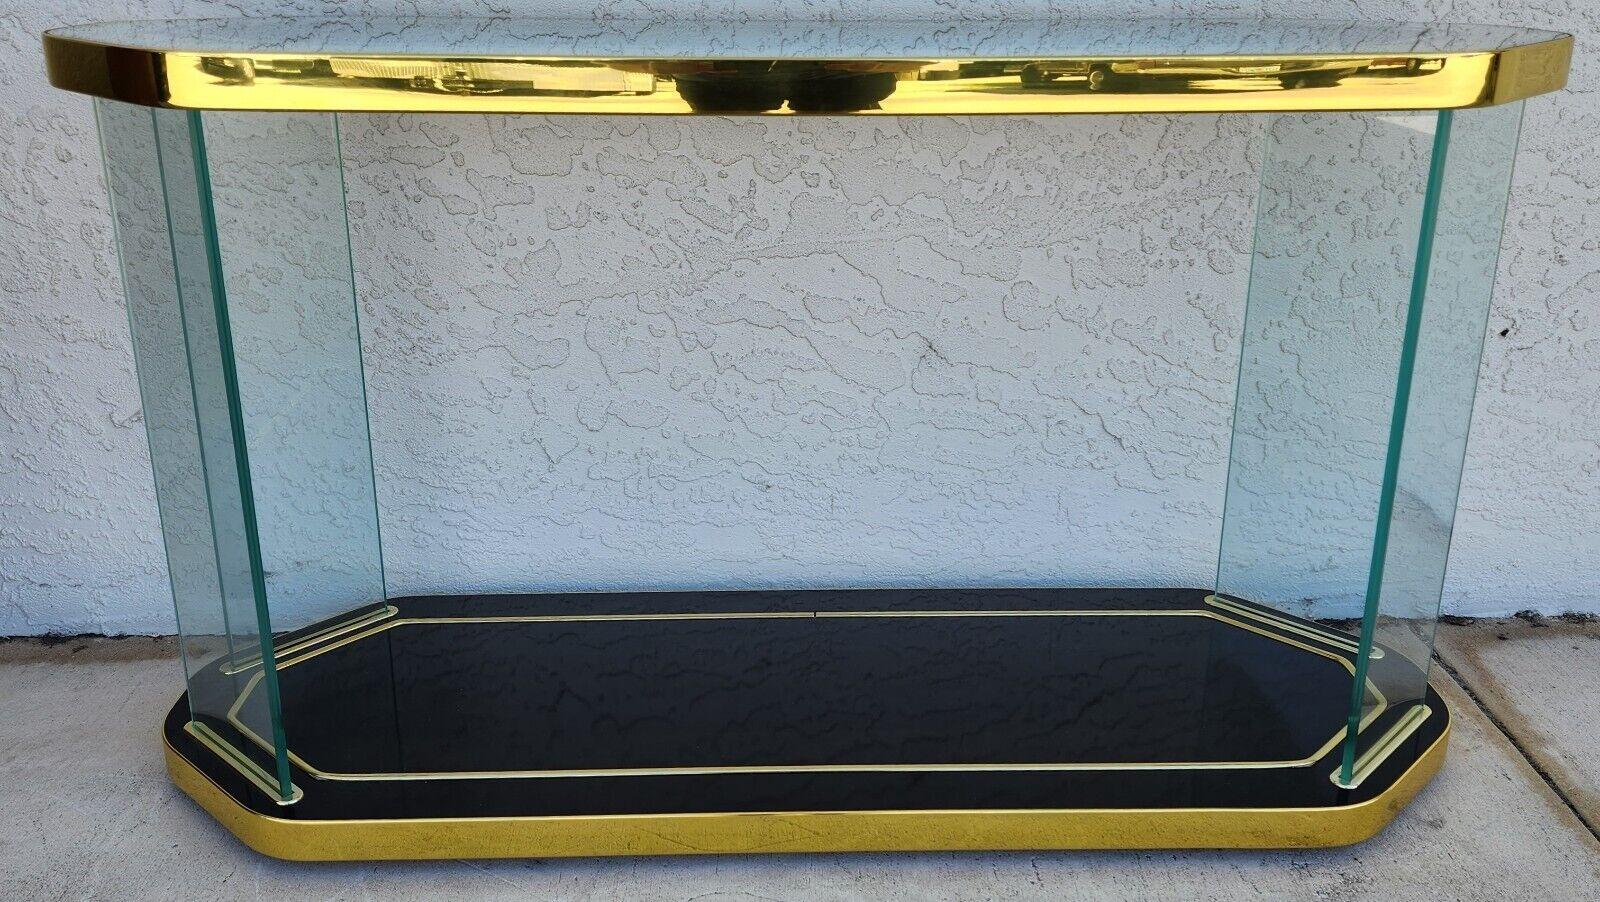 For FULL item description click on CONTINUE READING at the bottom of this page.

Offering One Of Our Recent Palm Beach Estate Fine Furniture Acquisitions Of A
Hollywood Regency Art Deco 1980s Vintage Rolling Console Dry Bar by Silver Furniture